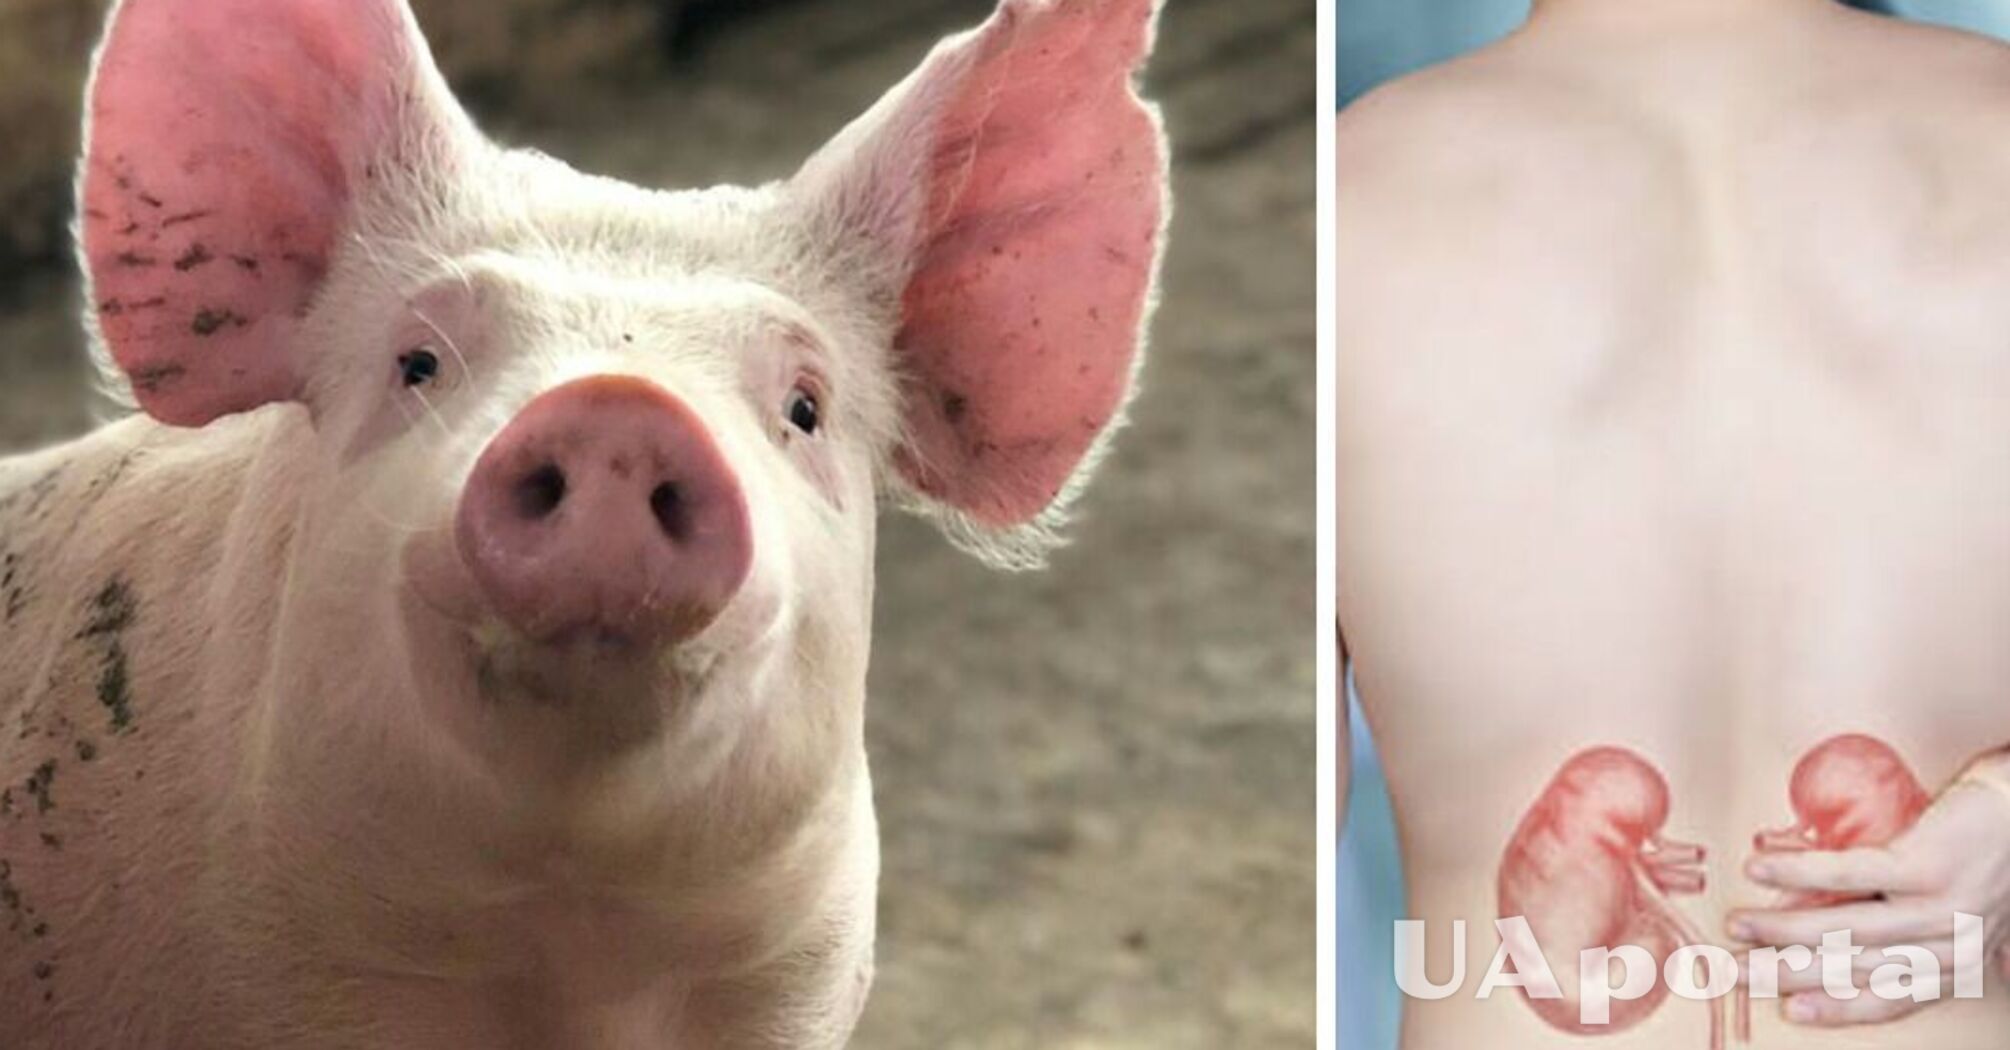 For the first time in the world: genetically modified pig kidney transplanted into a human